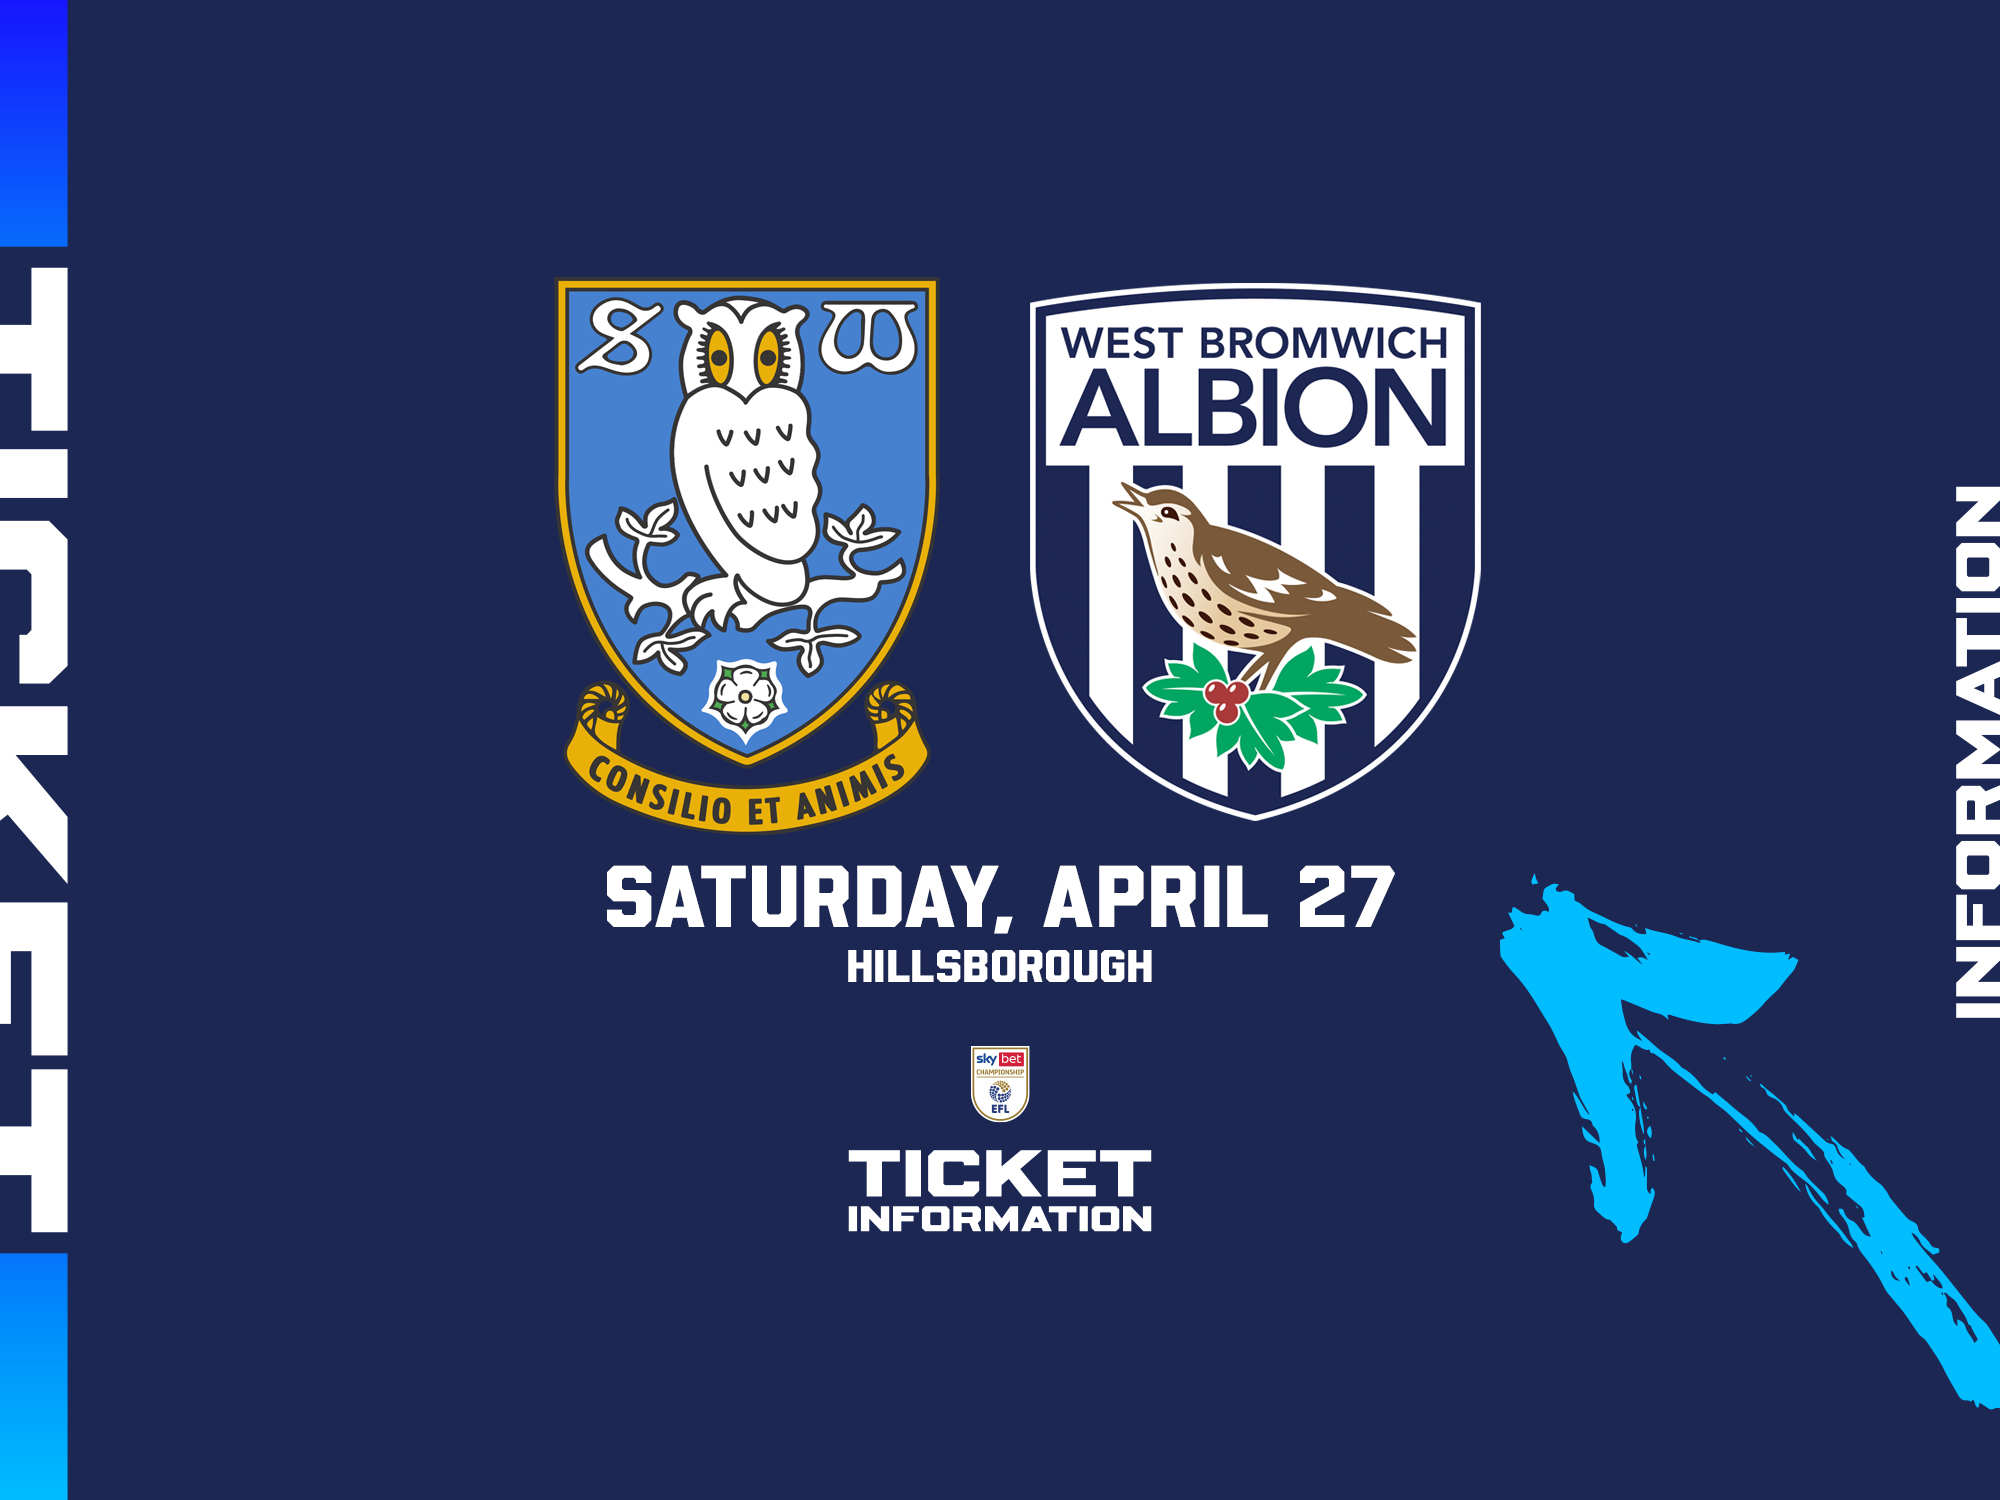 A ticket graphic displaying information for Albion's game at Sheffield Wednesday